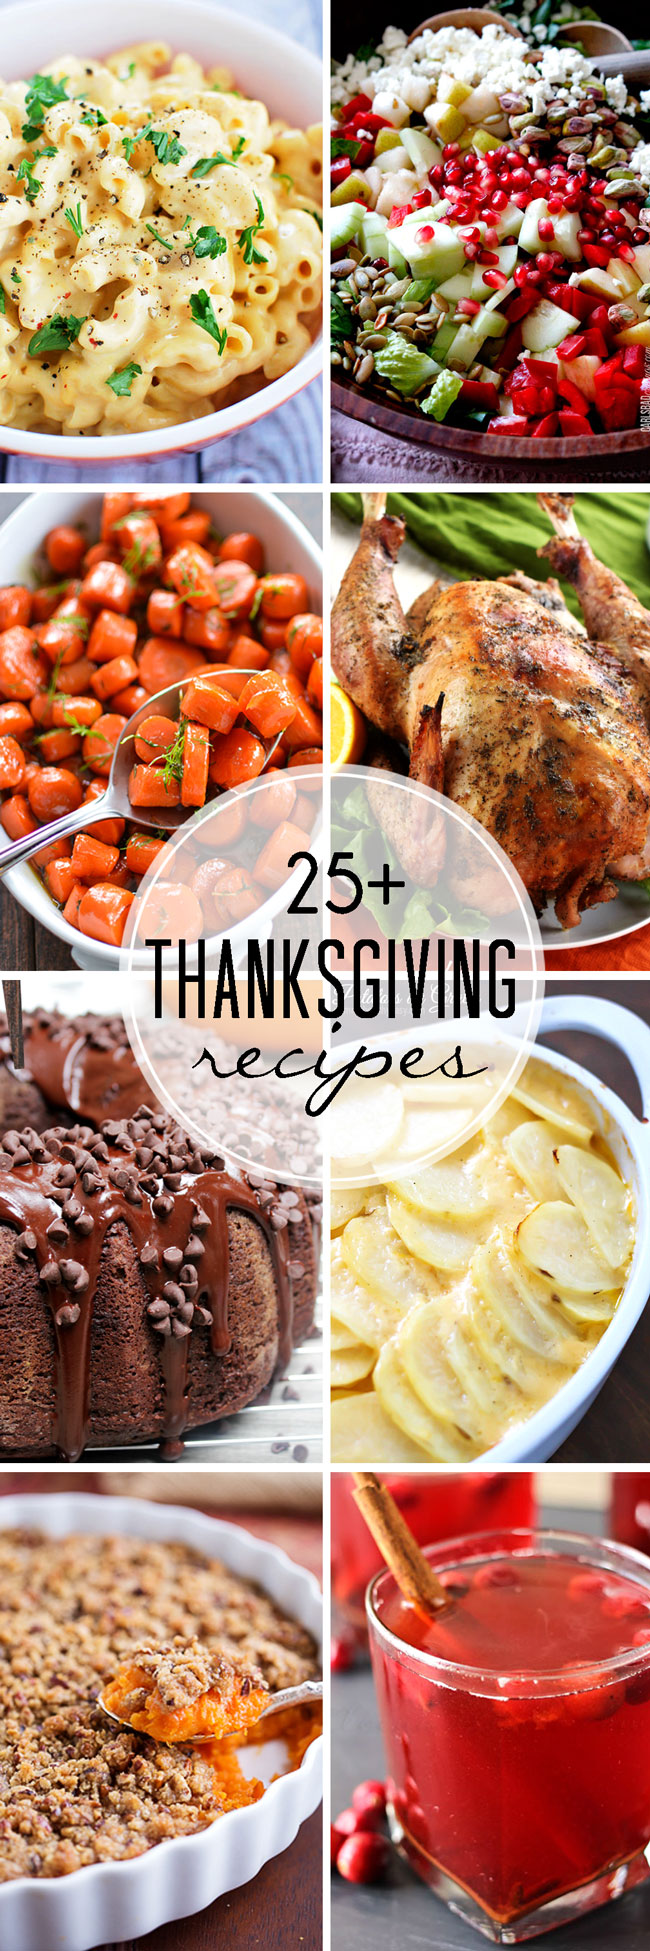 25+ Thanksgiving Recipes - Come over for a collection of holiday recipes that everyone will love! You'll find recipes for main dish, sides, apps, and sweet! | The Love Nerds